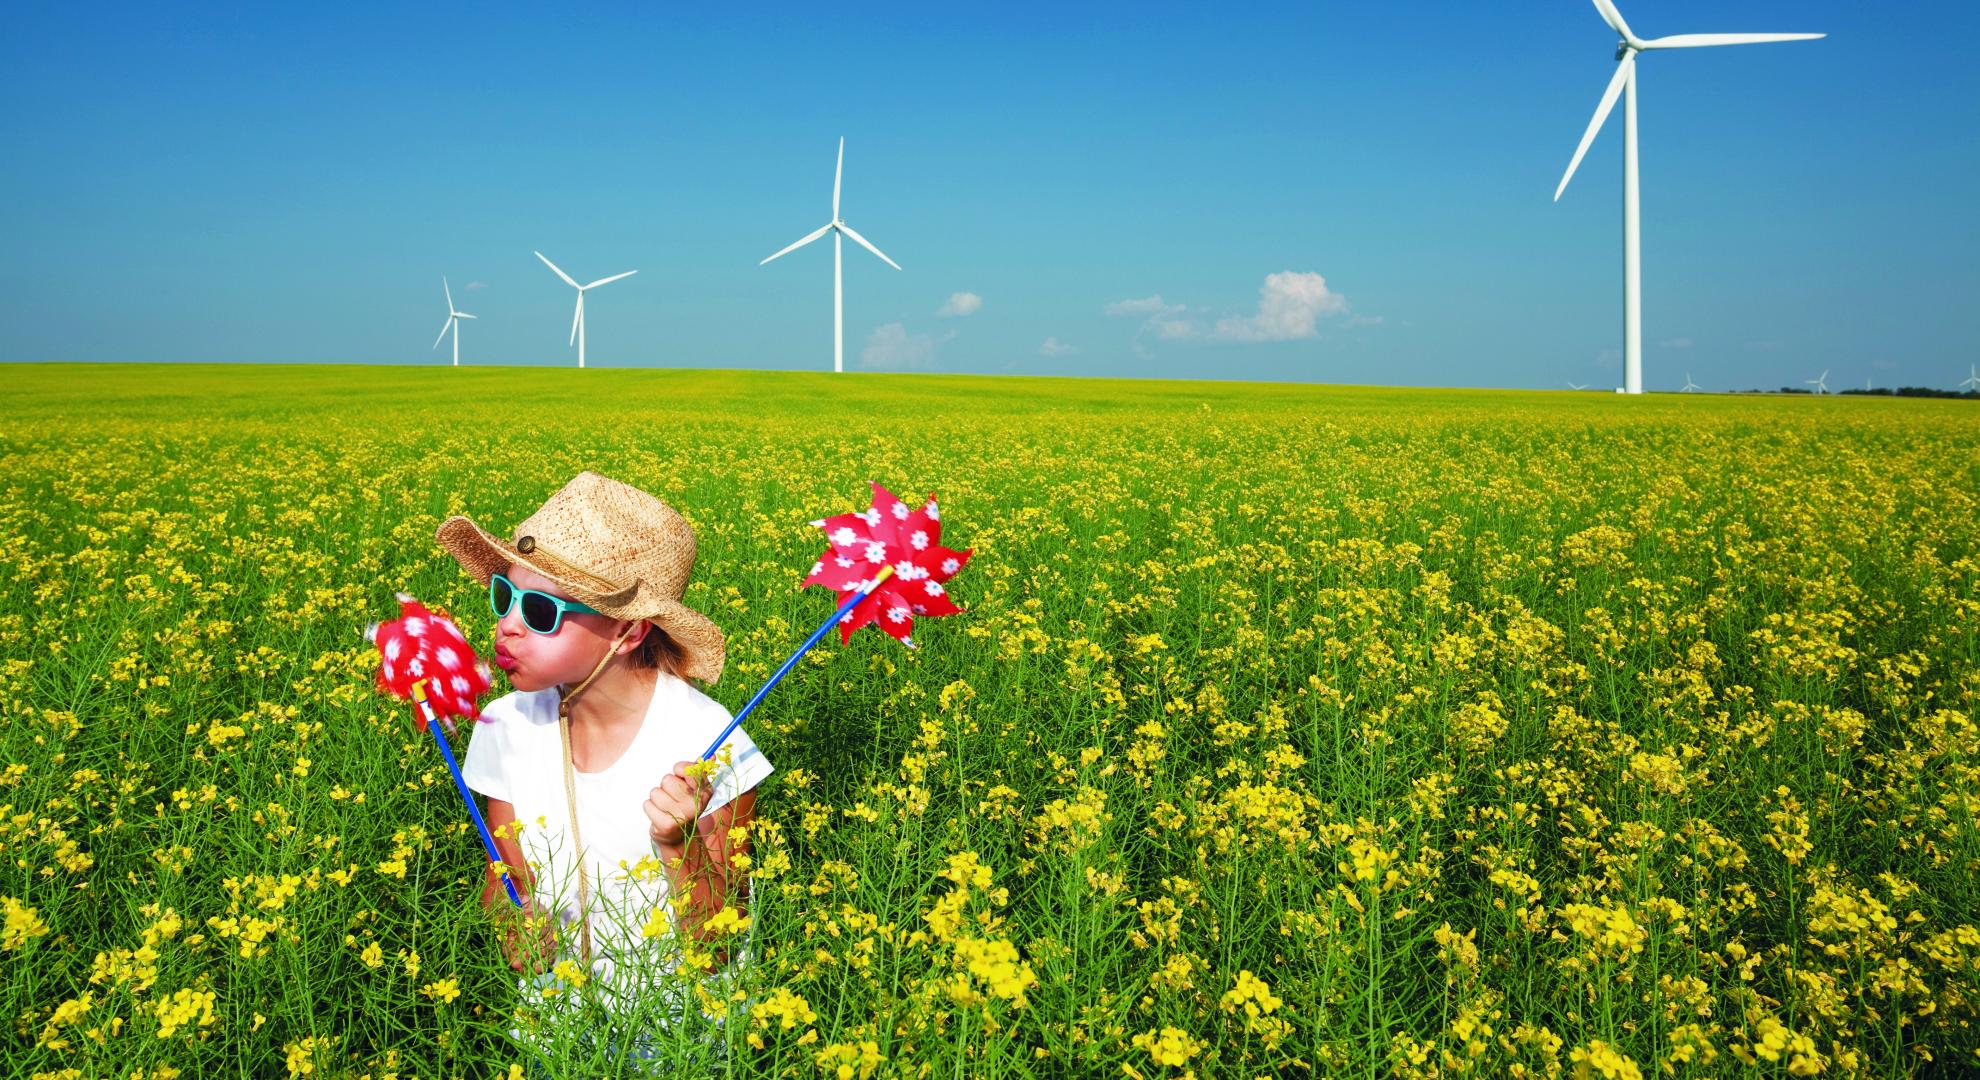 A child spinning a pinwheel in a field of flowers with wind turbines in the background